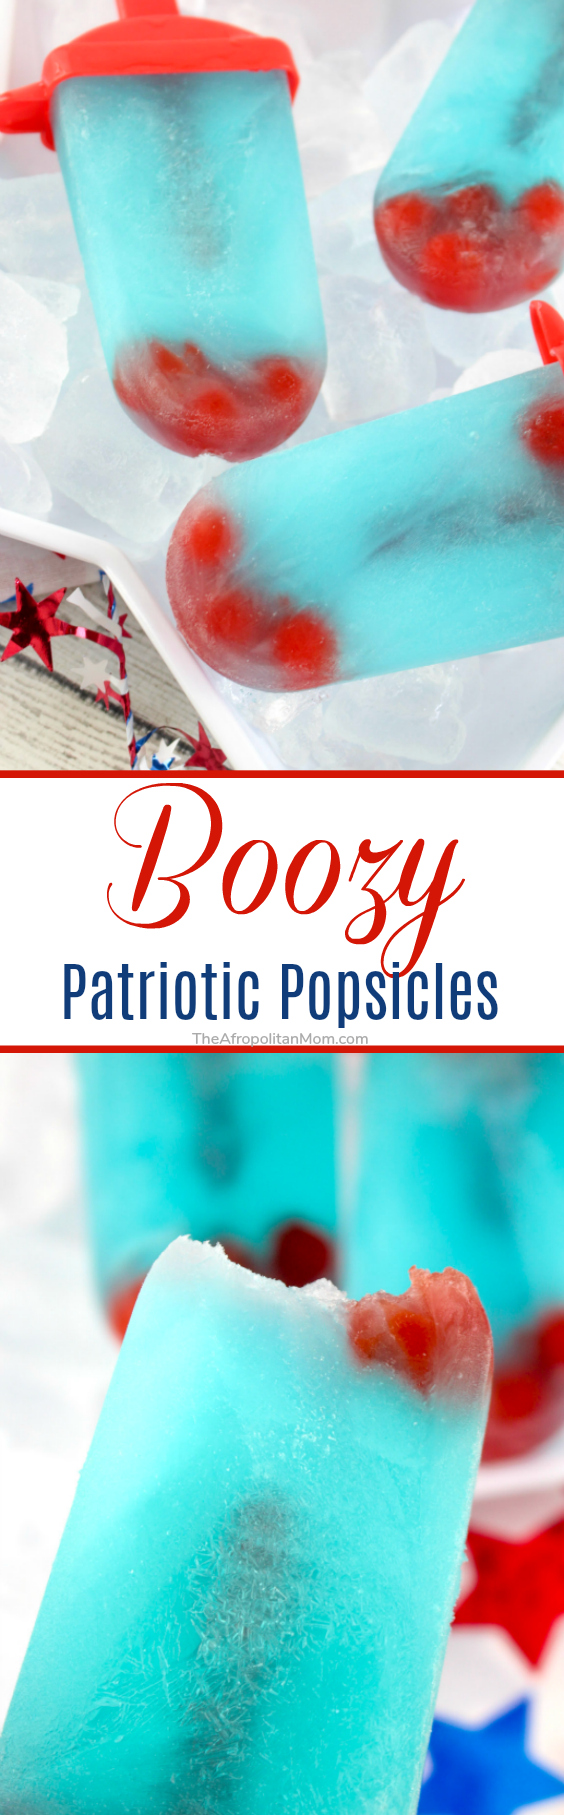 Celebrate fourth of July with this Boozy Patriotic Popsicles